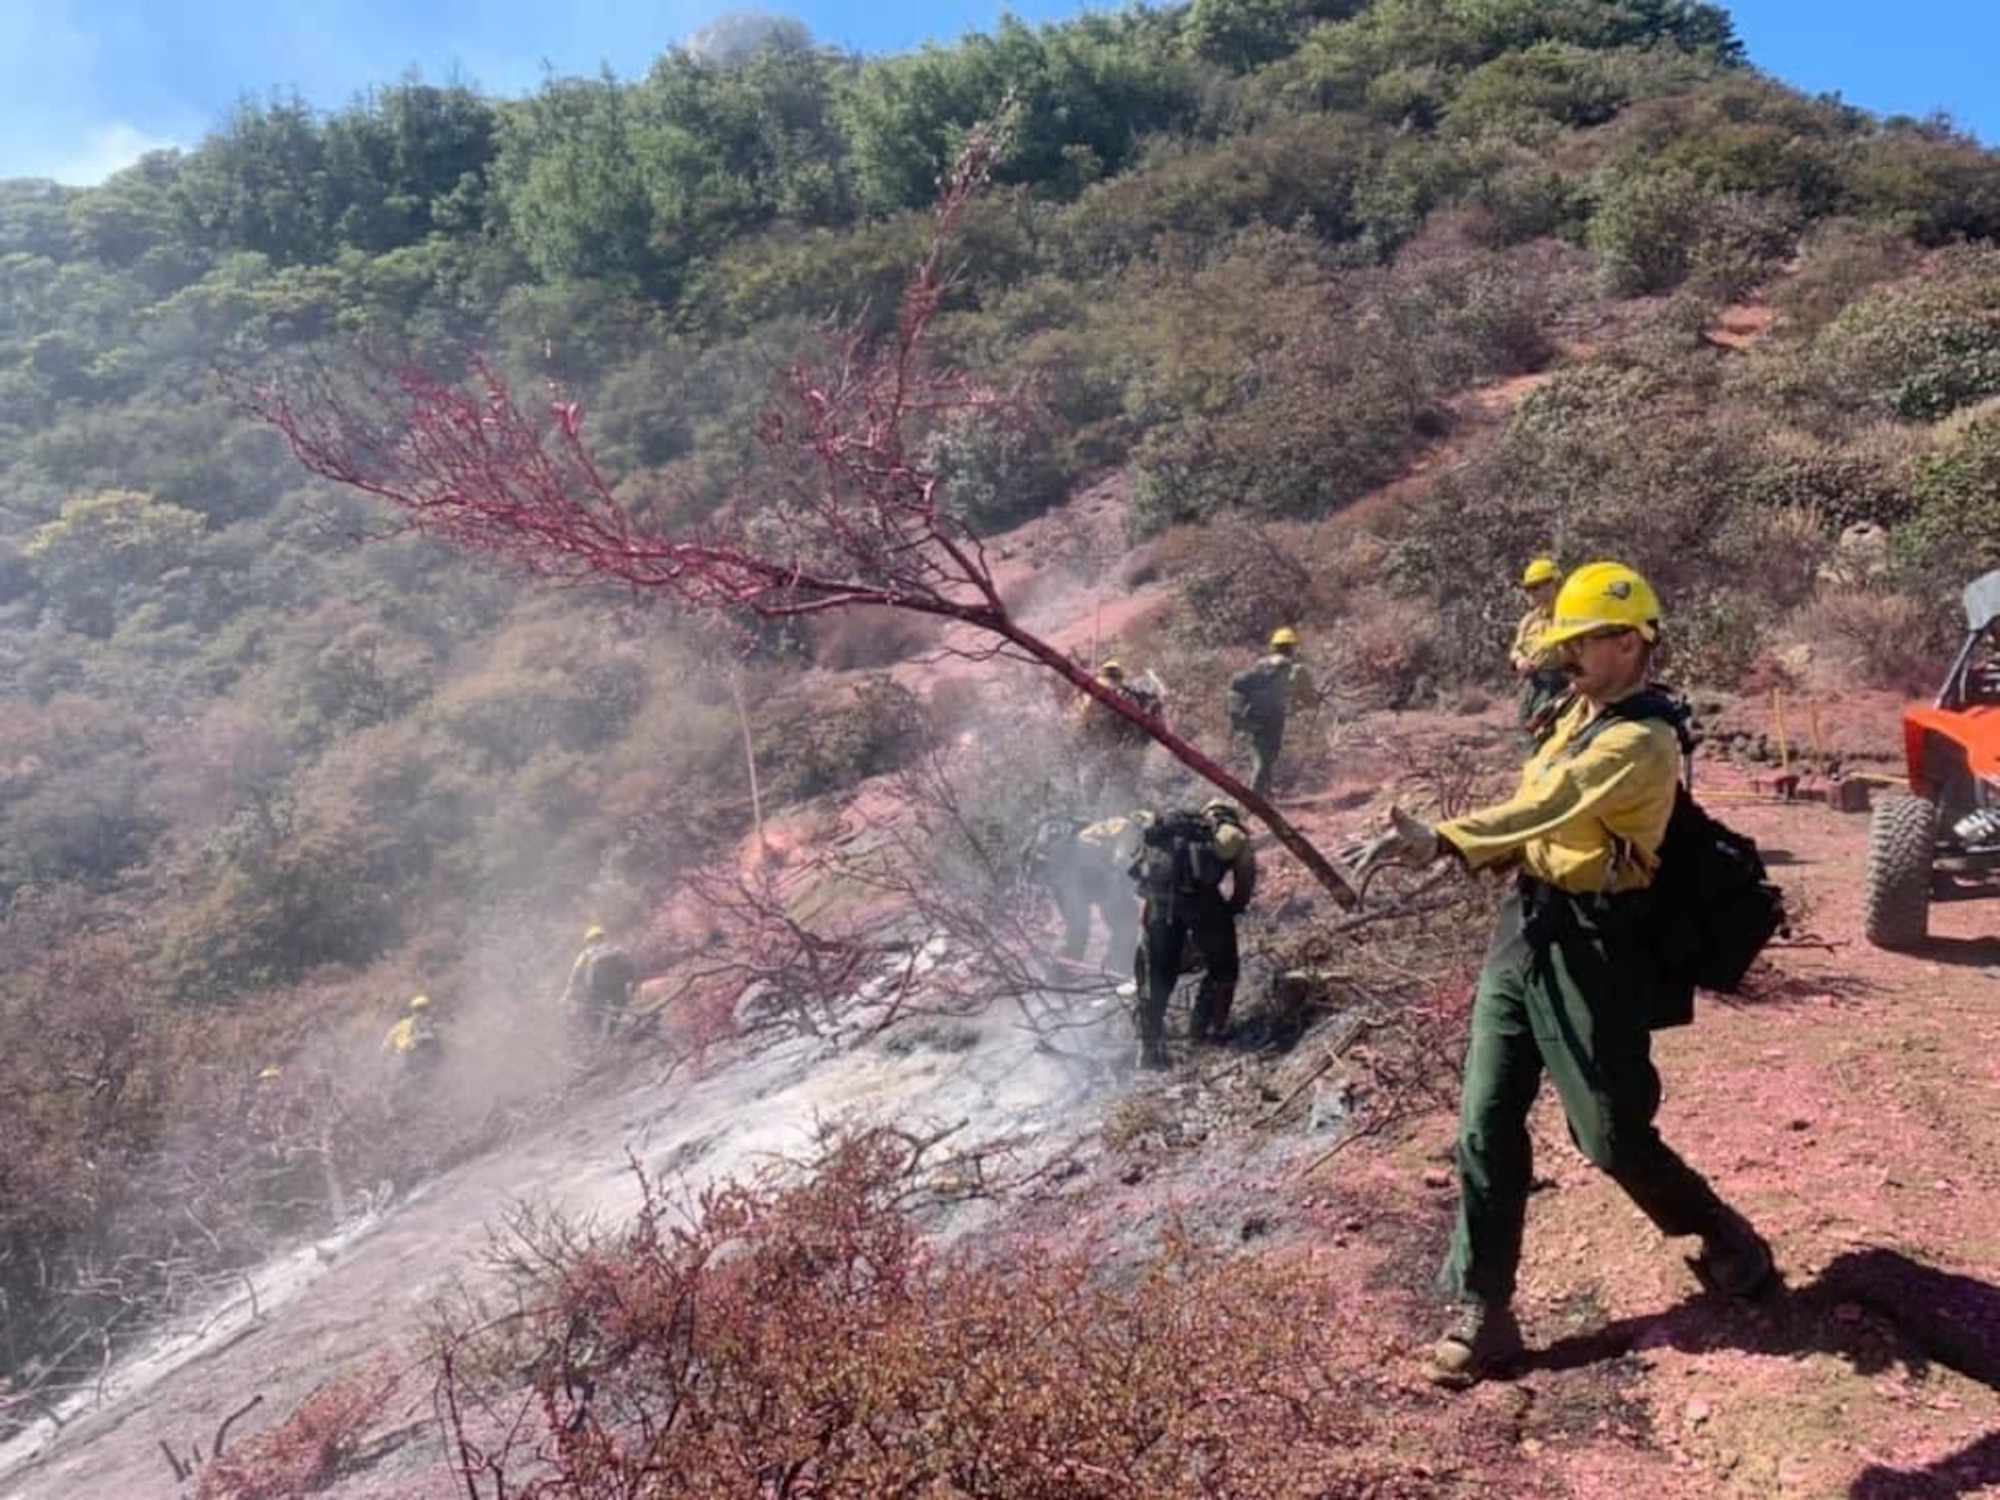 Firefighters assigned to the 30th Civil Engineer Squadron help contain the Alisal Fire Oct. 11, 2021, at Los Padres National Forest in Goleta, Calif. The Firefighters cut down dead trees and sifted the ground to help contain the wildfire. (Courtesy photo)